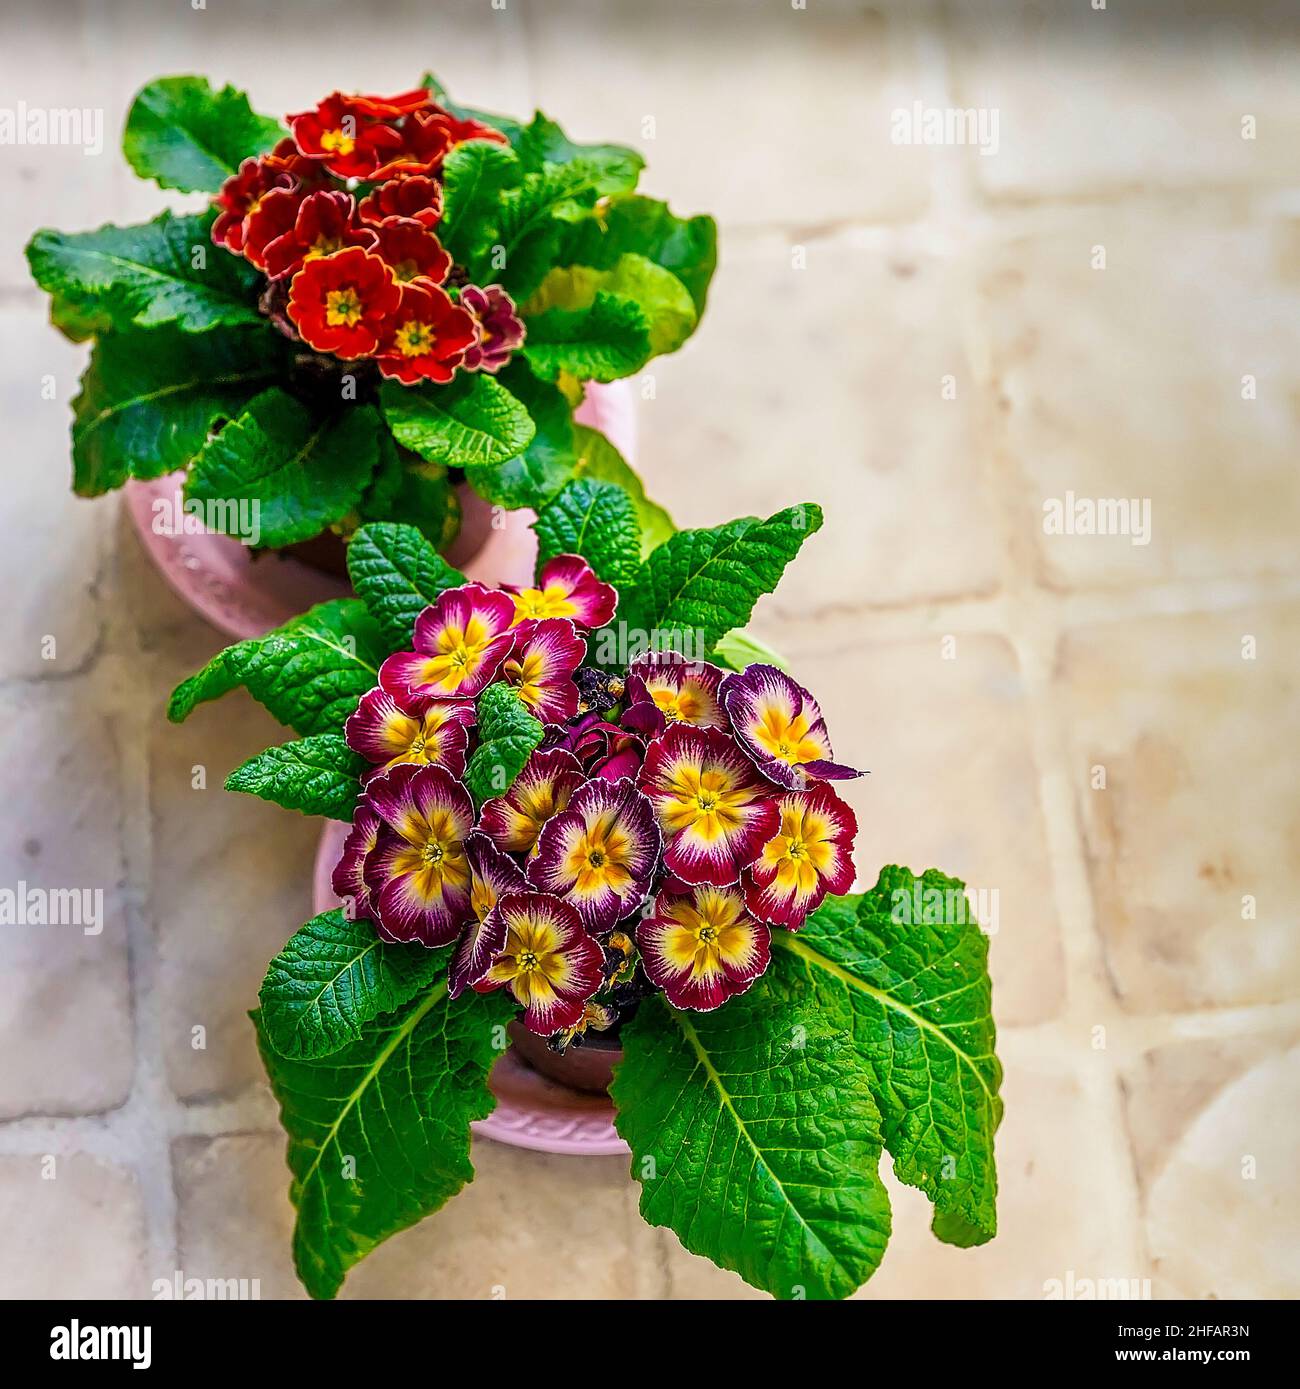 Primula Auricula Flowers.Isolated. Flat Lay Two colorful flower pots on a  tile surface. Focus in the front. Stock Image. Stock Photo